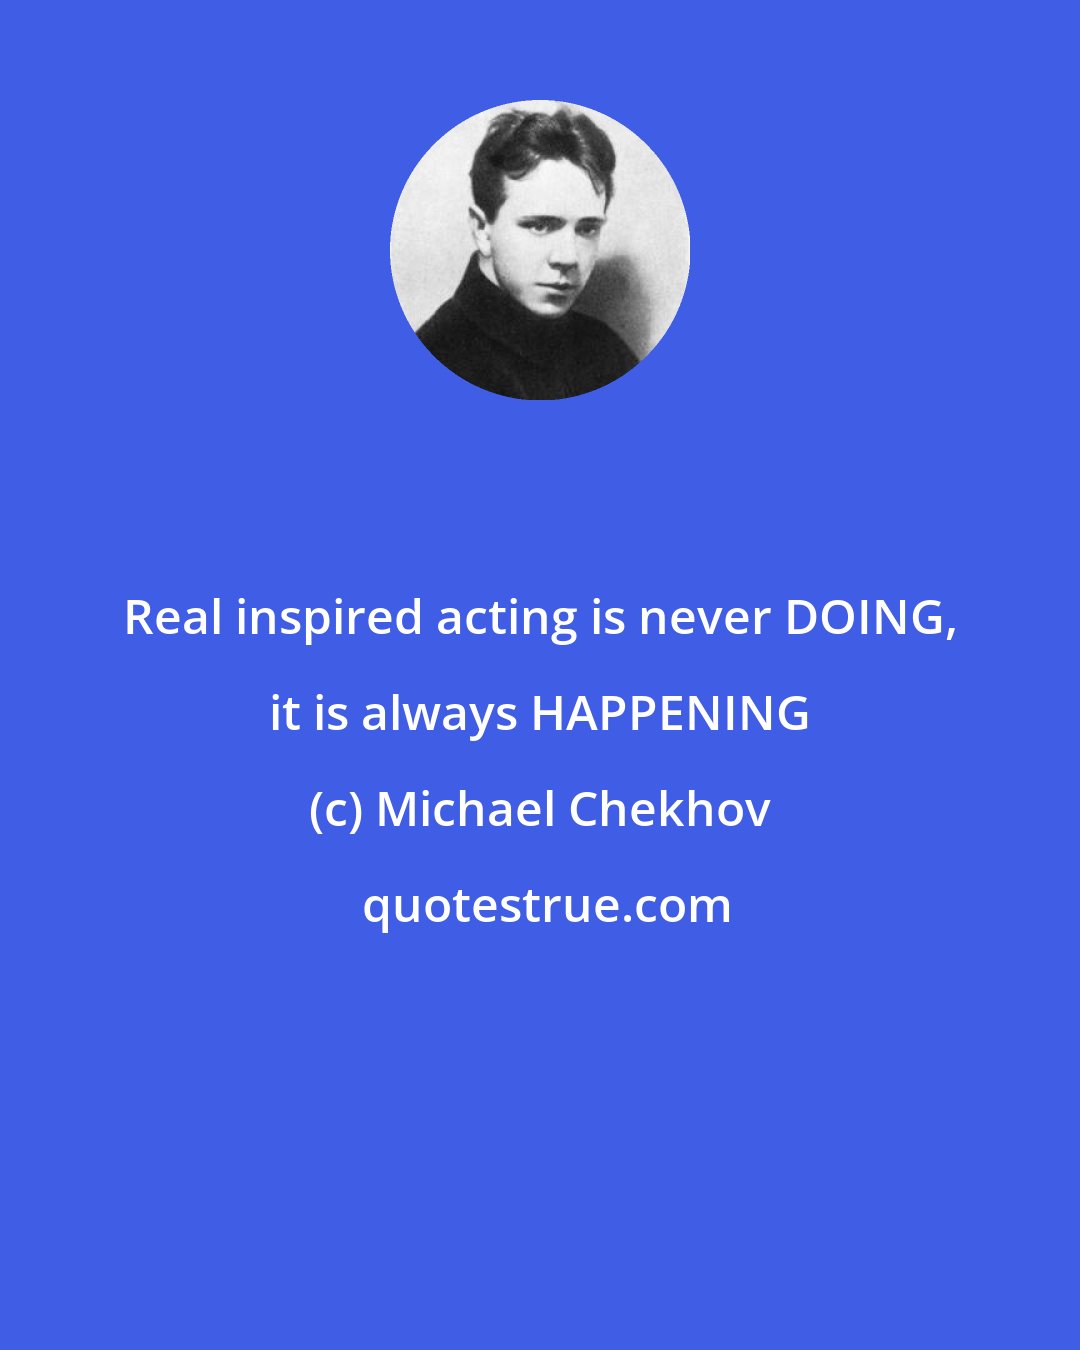 Michael Chekhov: Real inspired acting is never DOING, it is always HAPPENING